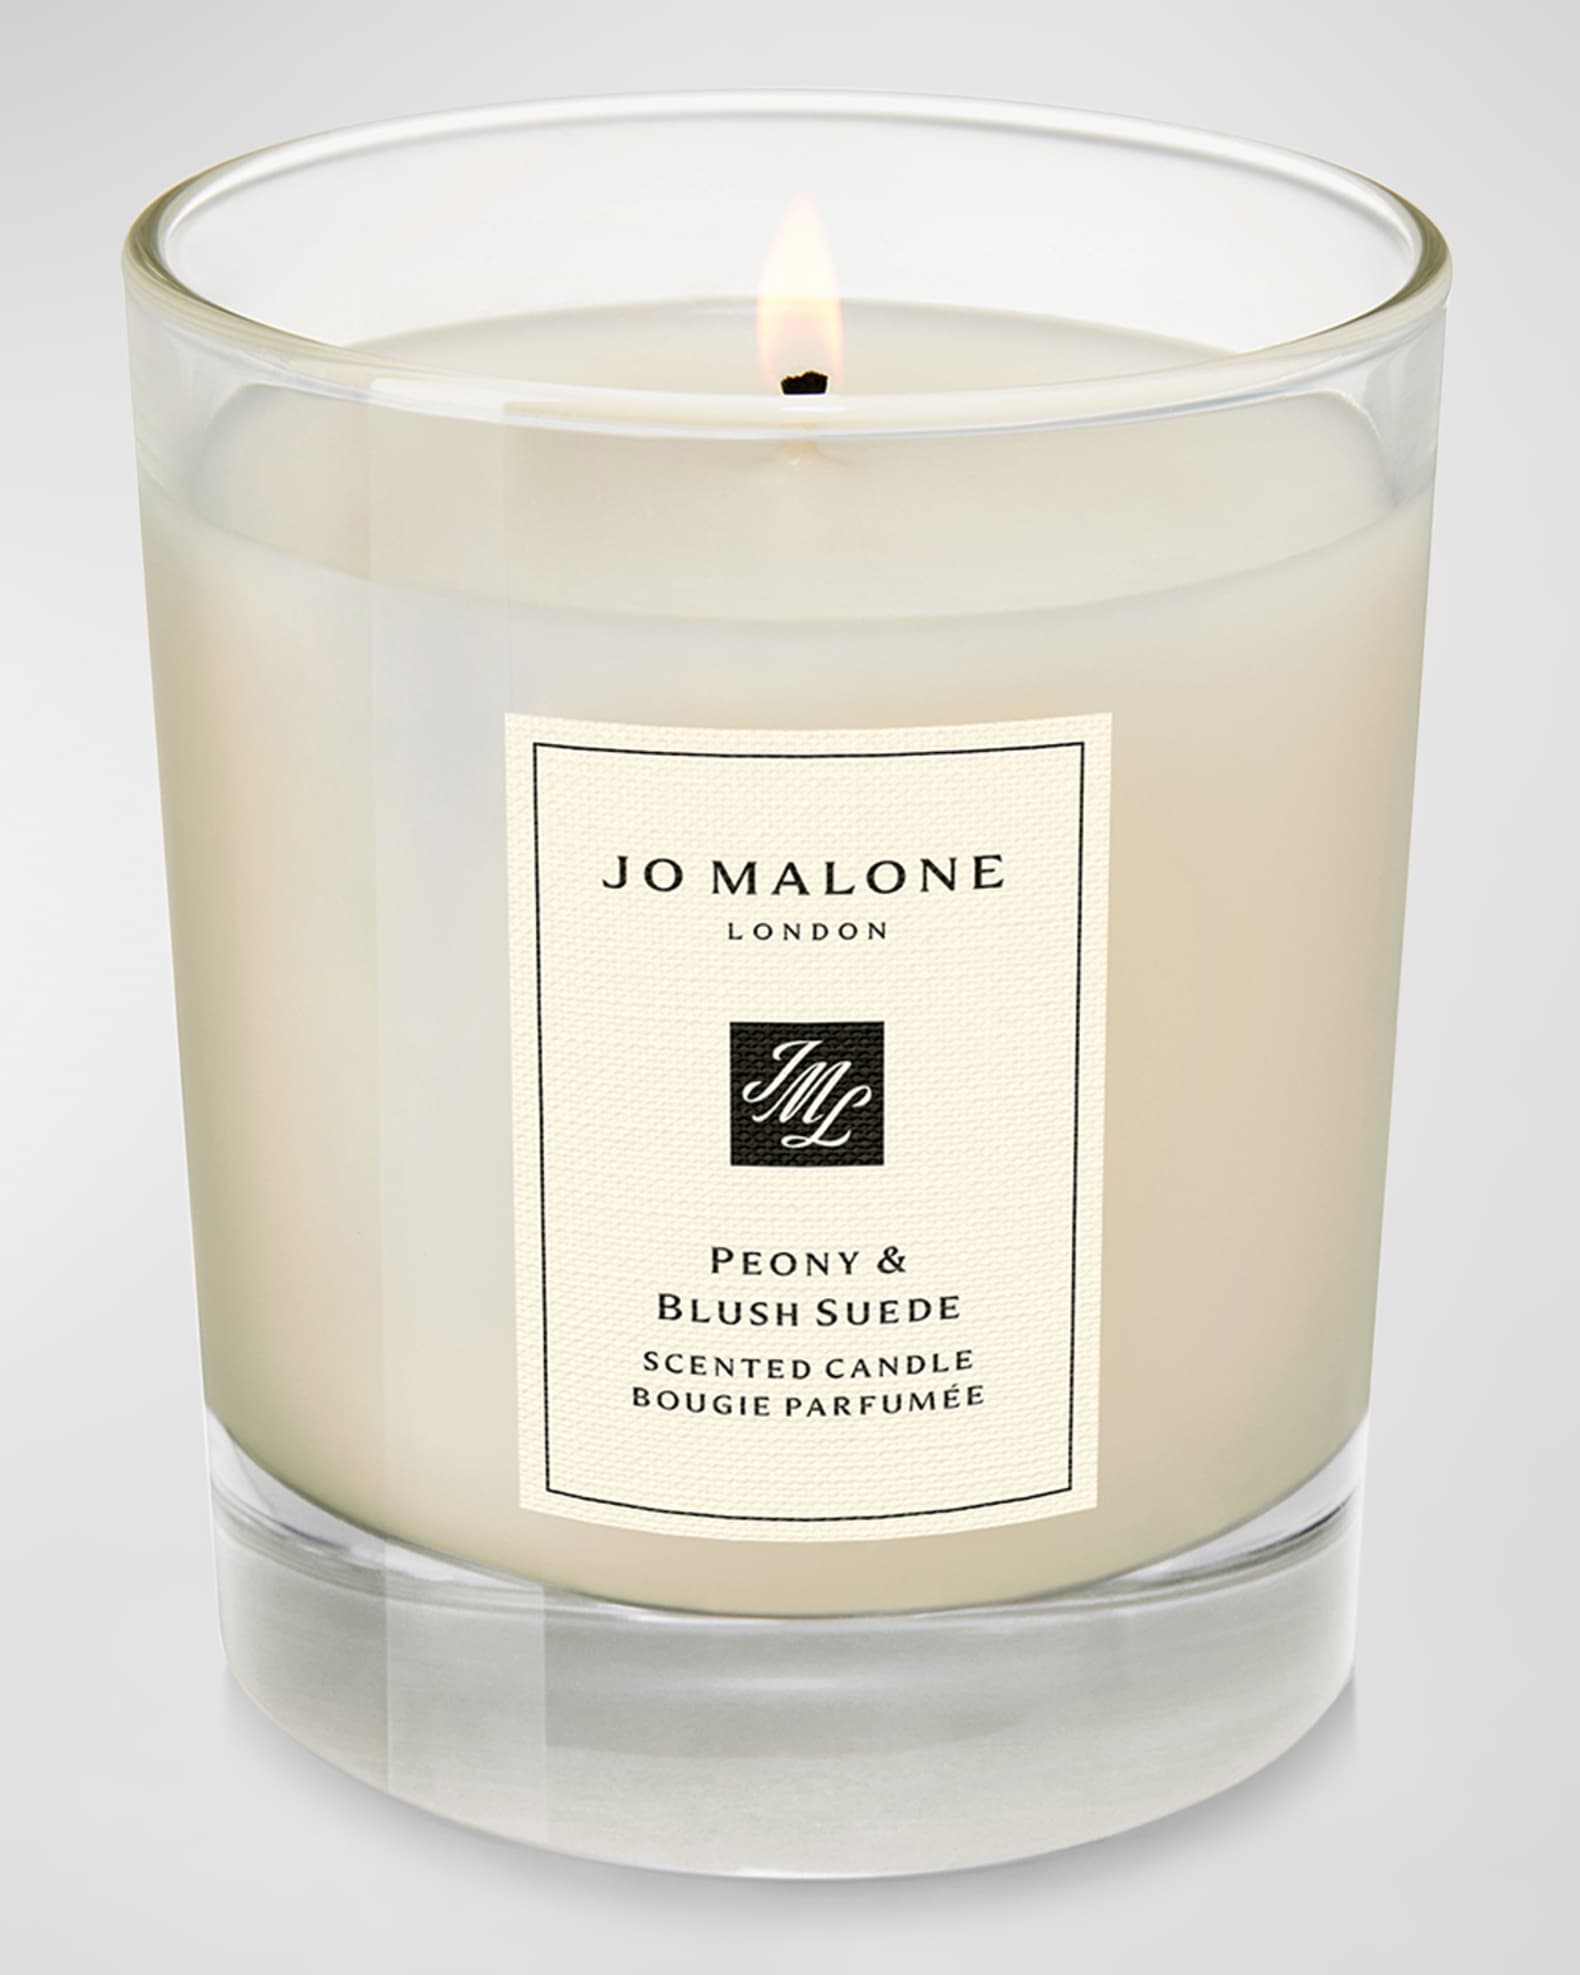 Jo Malone London Peony & Blush Suede Scented Candle | Neiman Marcus